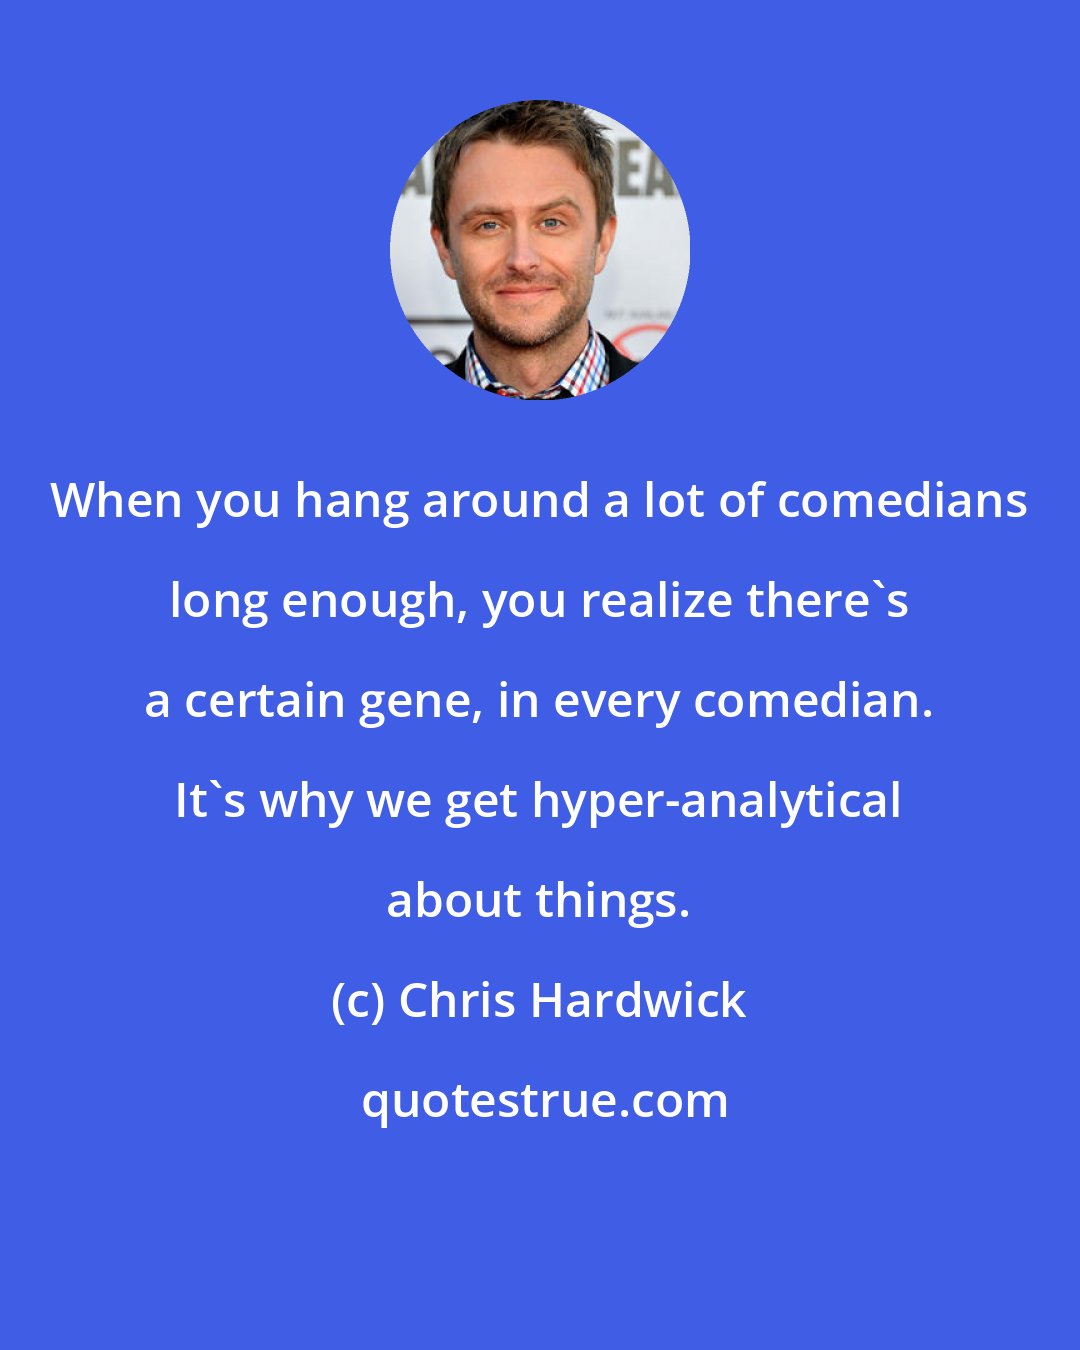 Chris Hardwick: When you hang around a lot of comedians long enough, you realize there's a certain gene, in every comedian. It's why we get hyper-analytical about things.